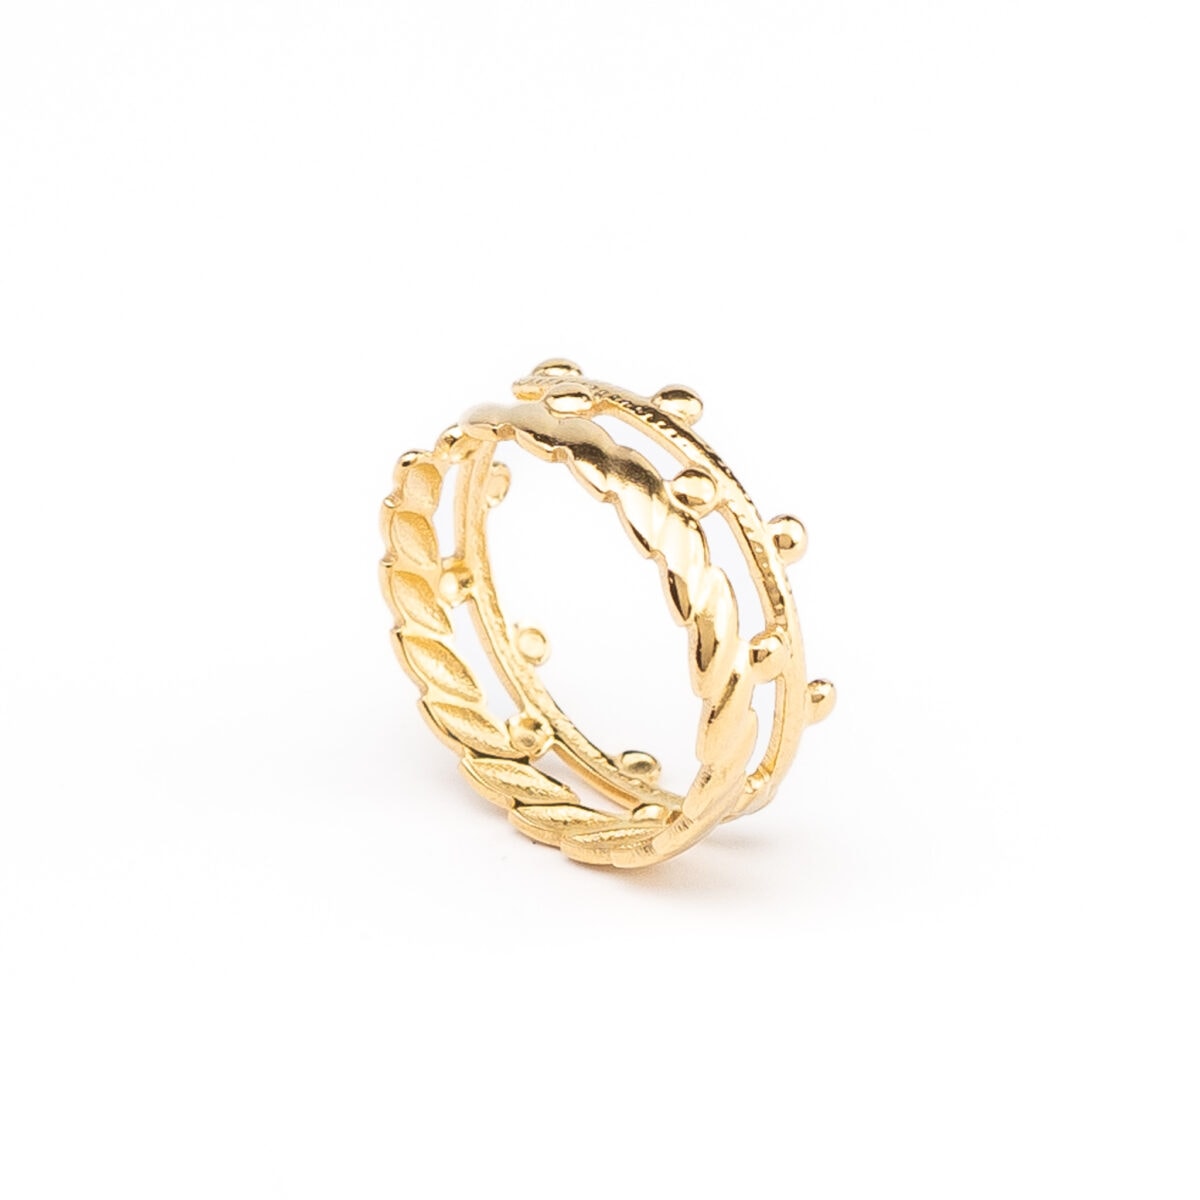 https://m.clubbella.co/product/regal-ring/ Regal Ring 4